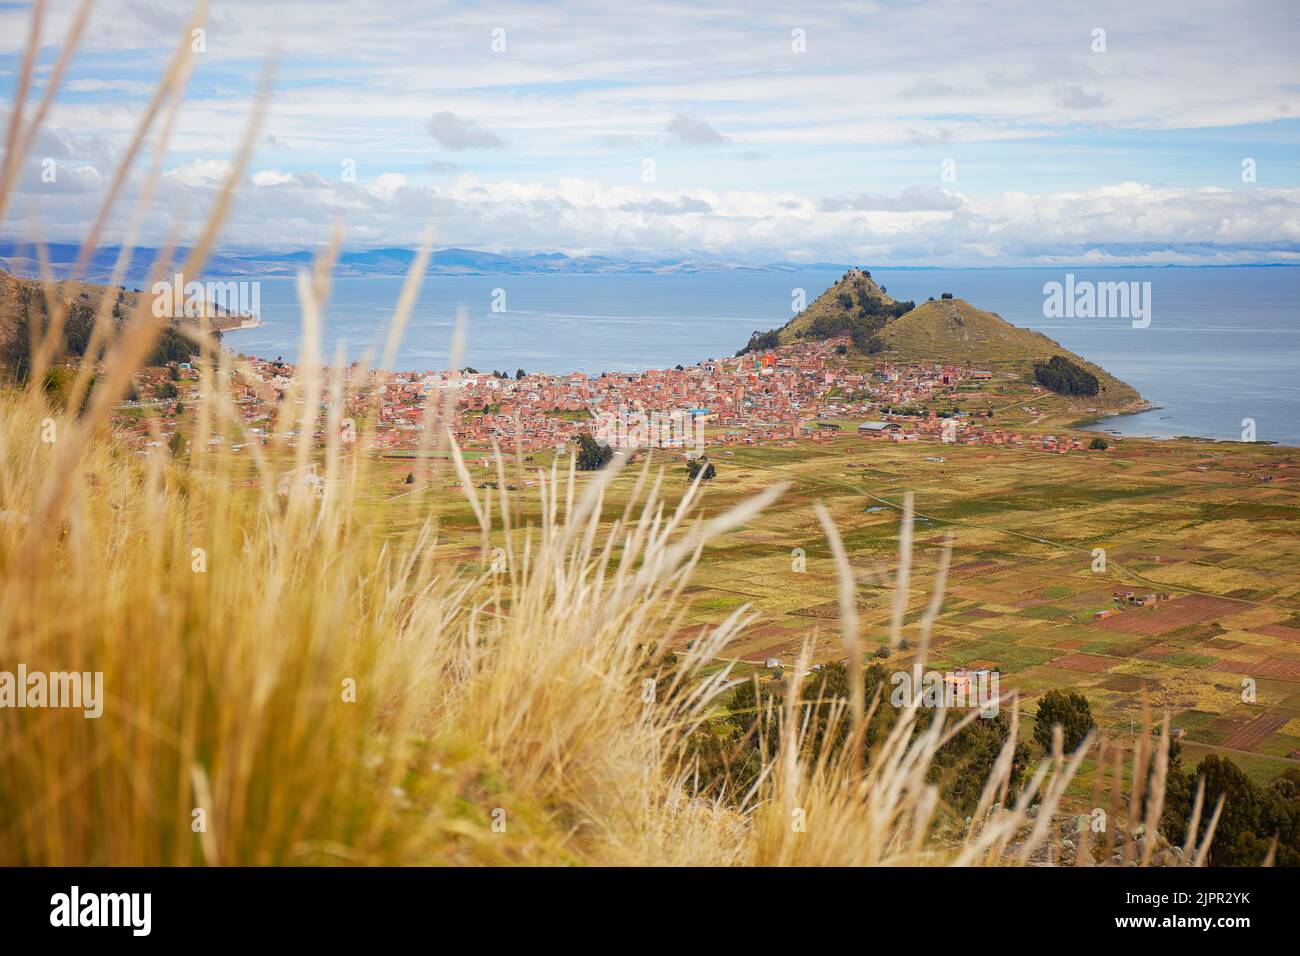 View over the town of Copacabana on Lake Titicaca, La Paz, Bolivia. Stock Photo